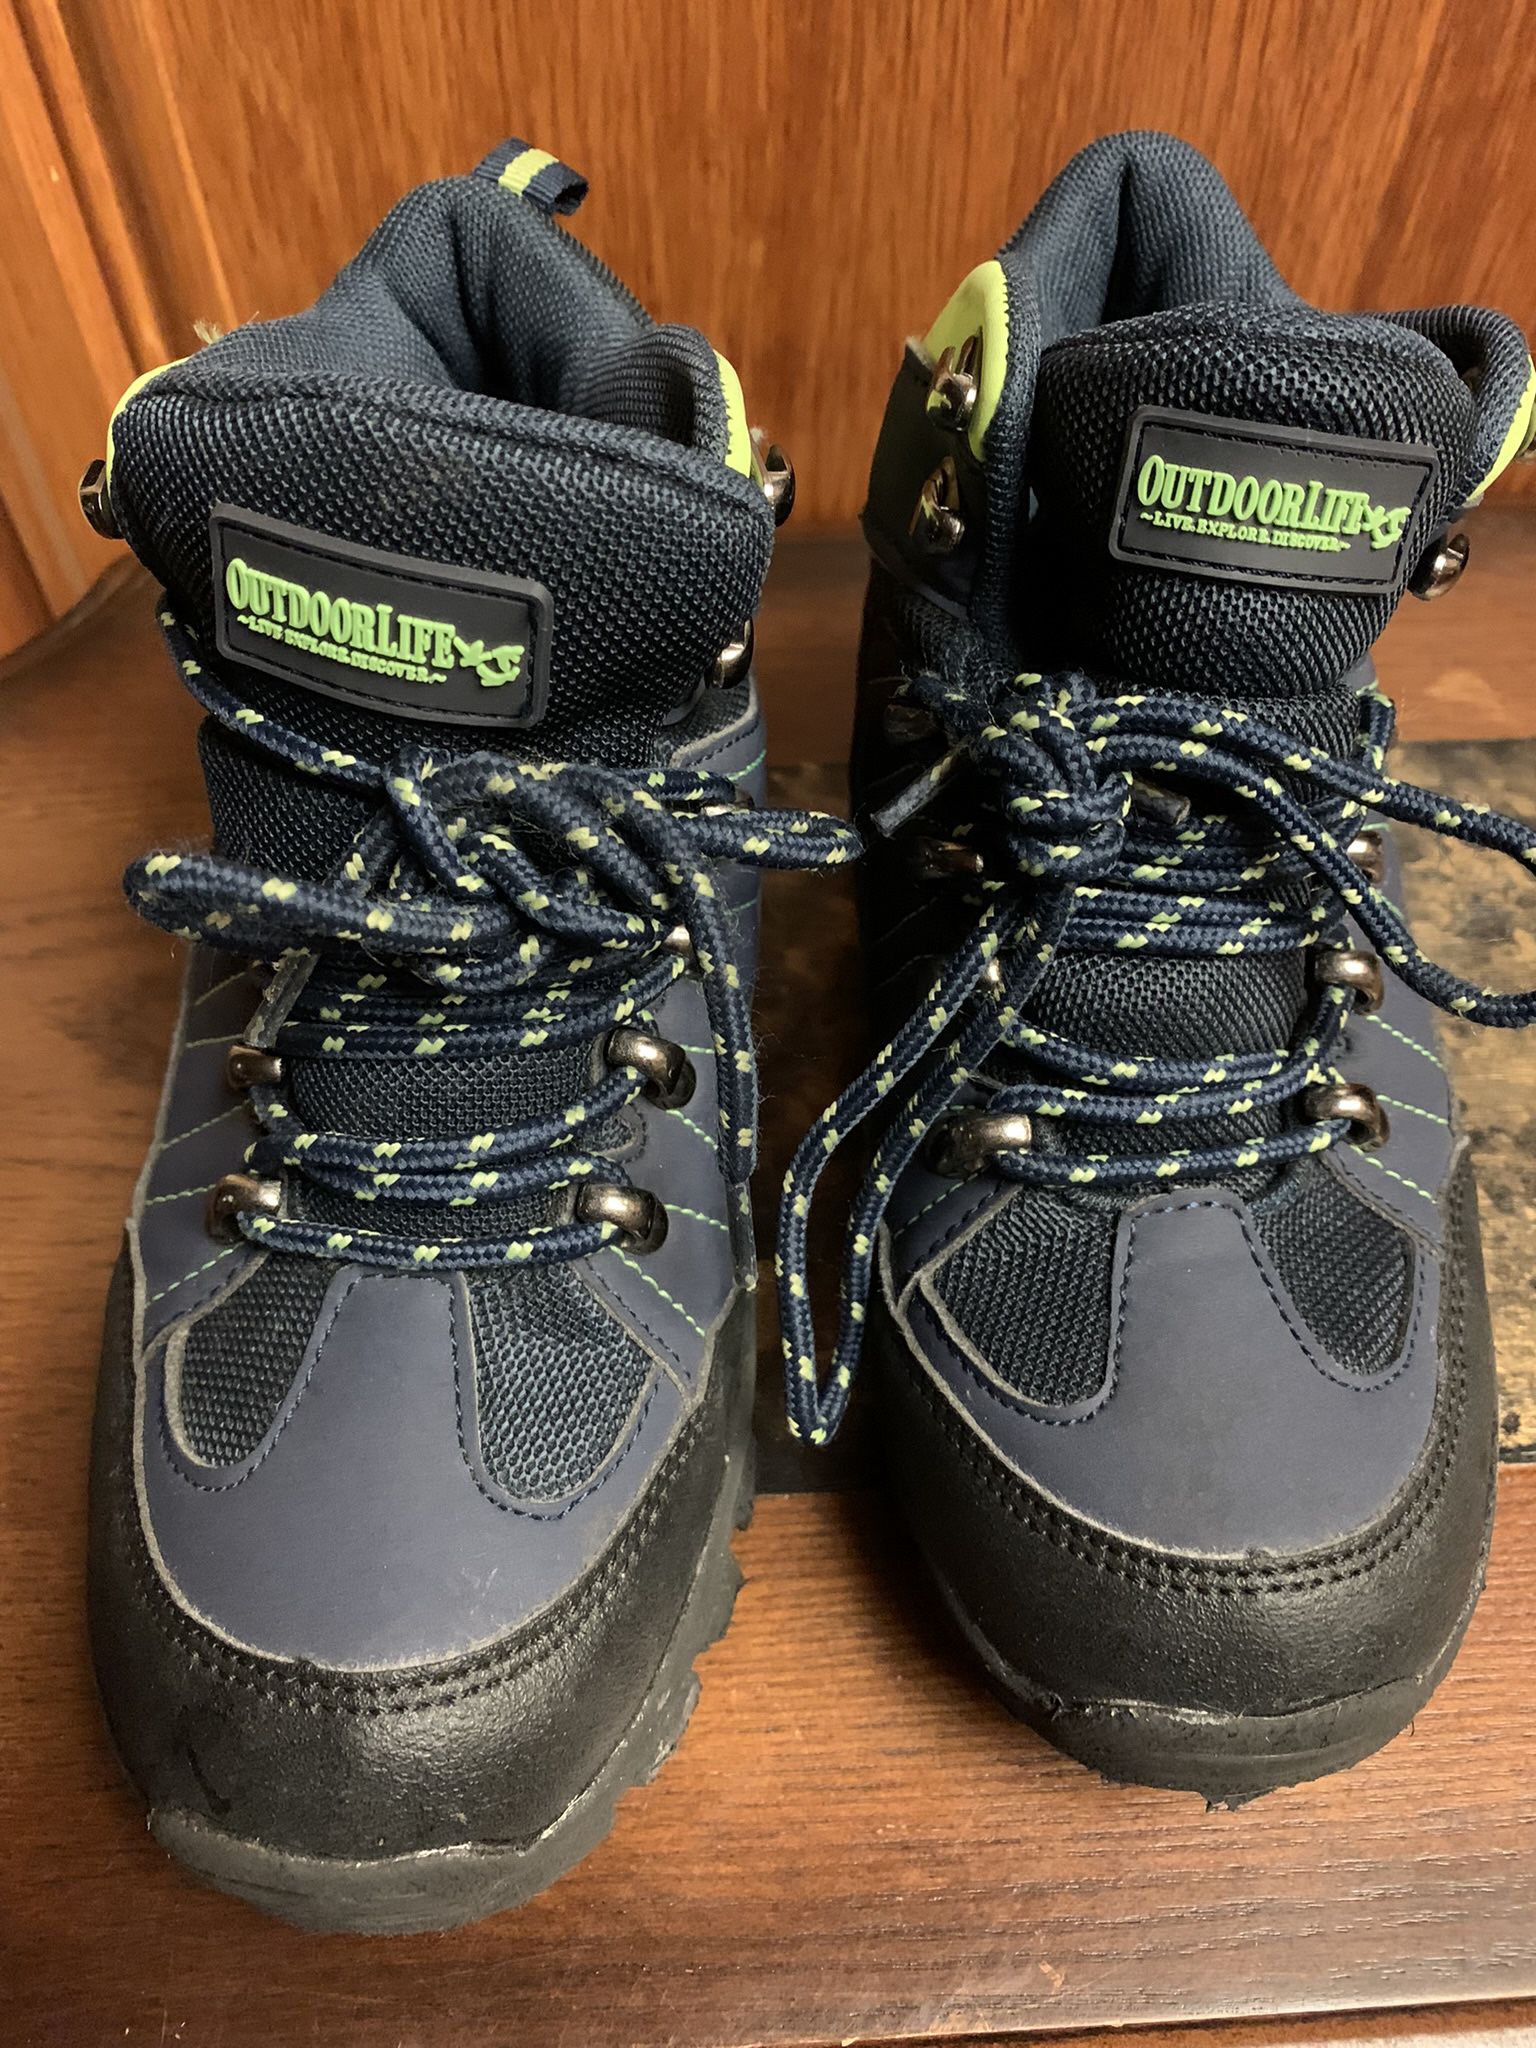 Children’s outdoor life snow/hiking boots